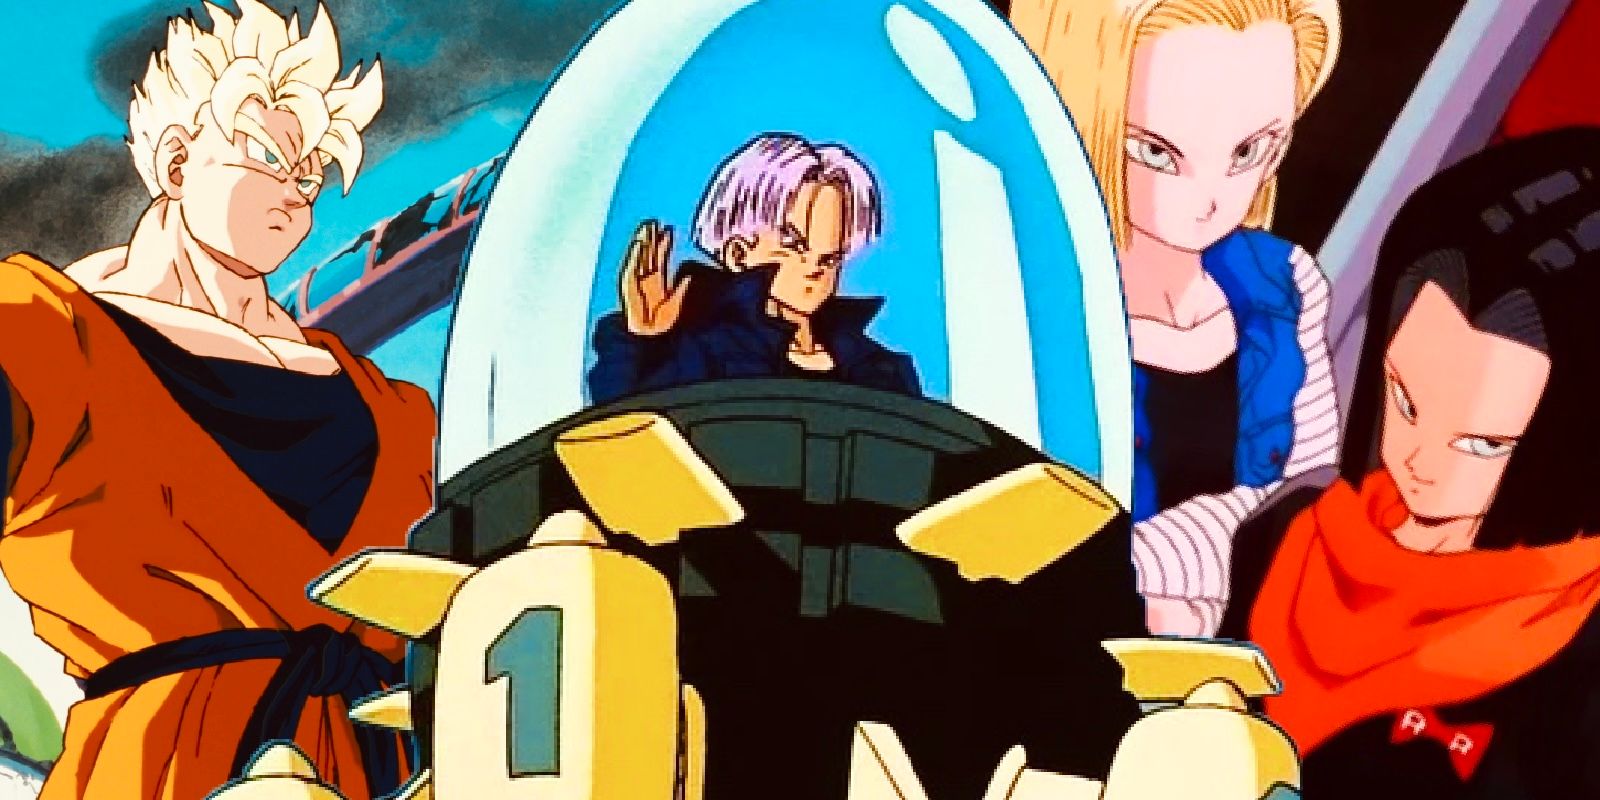 Time travel in dragon ball z with Super Saiyan Gohan, trunks in the capsule corp time machine and androids 18 & 17